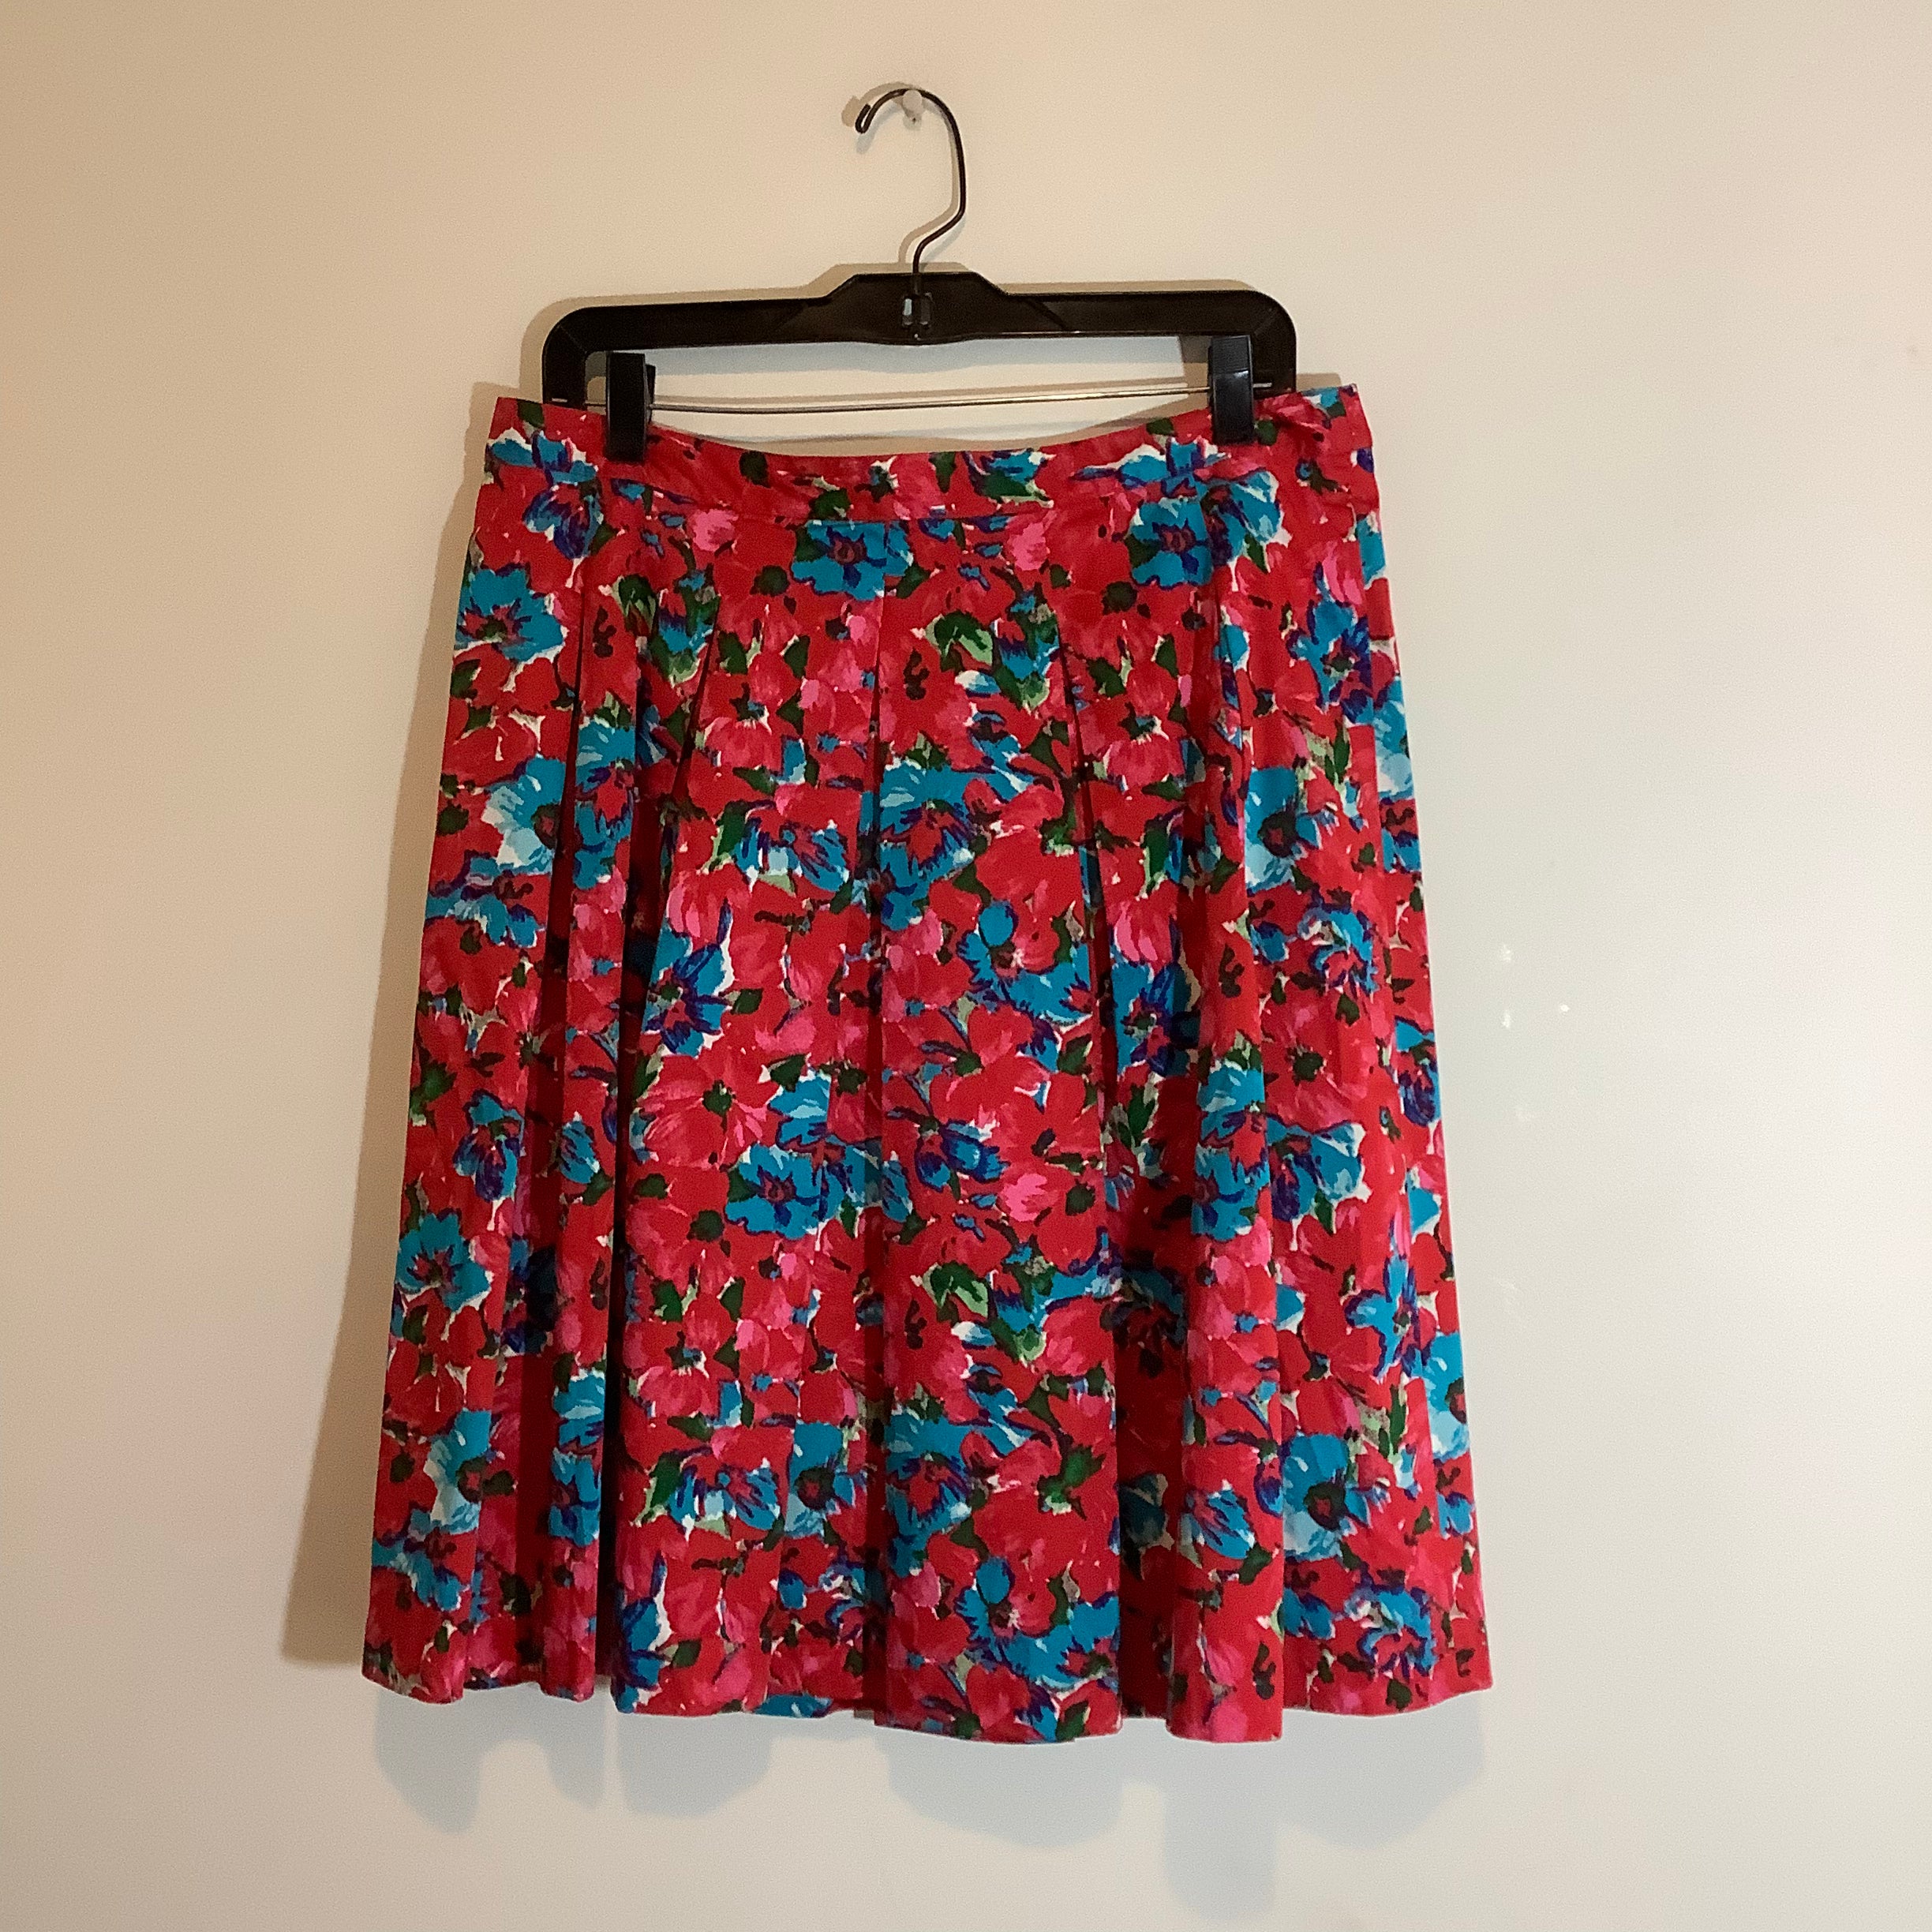 Talbots Red Skirt Size 10P NWT